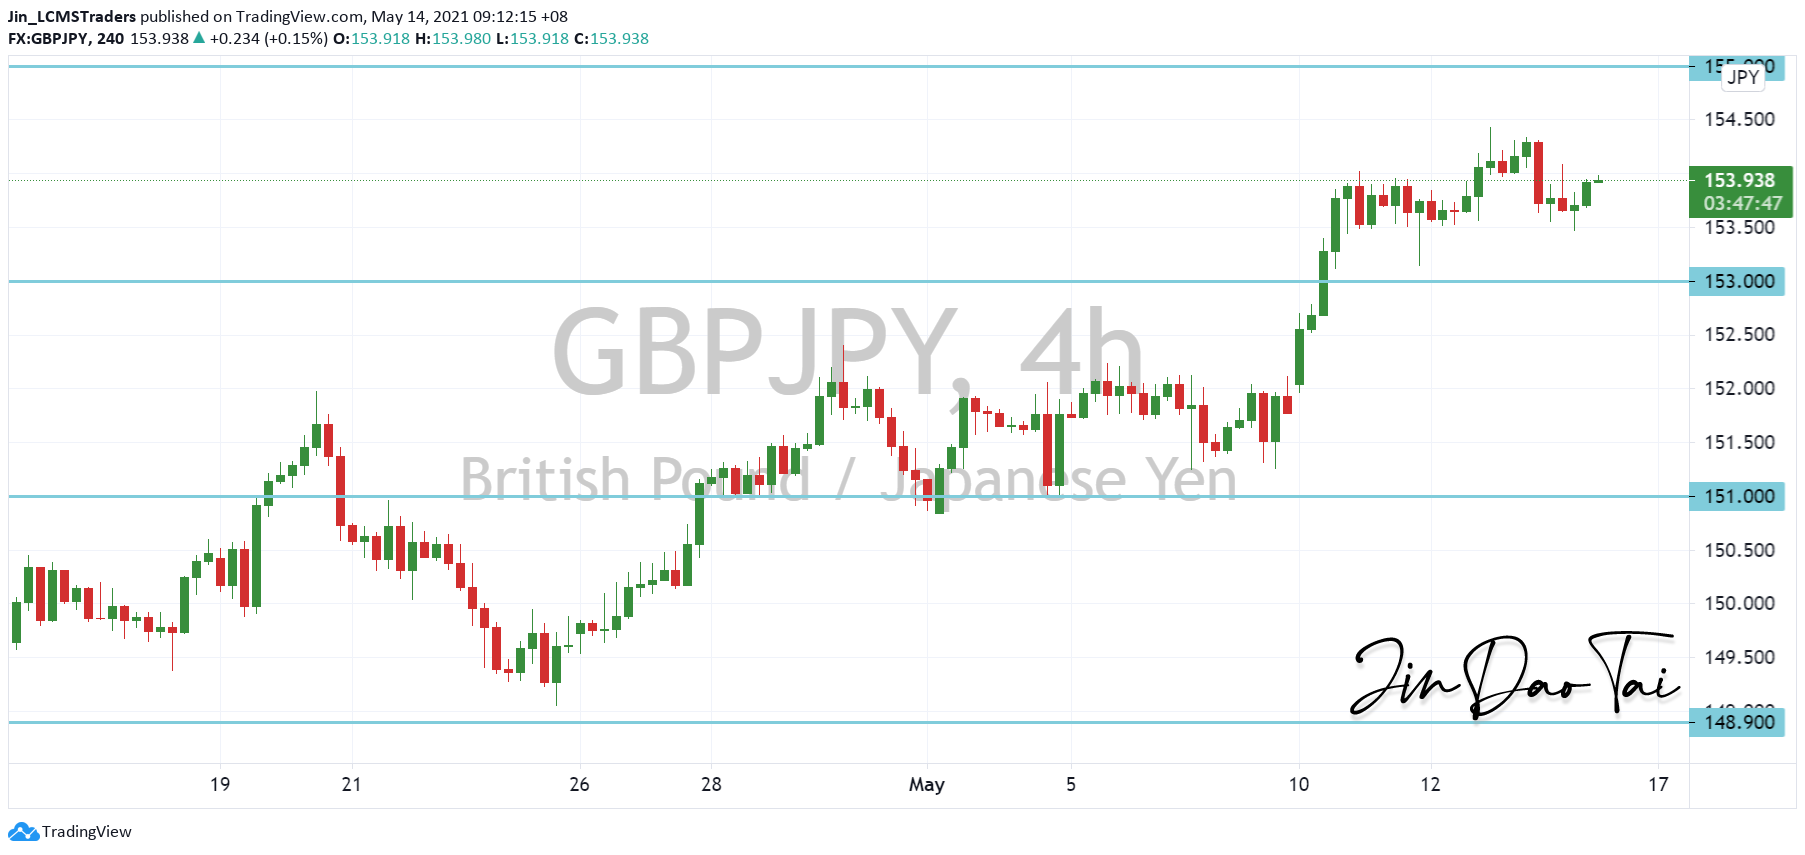 GBP/JPY Outlook (14 May 2021)